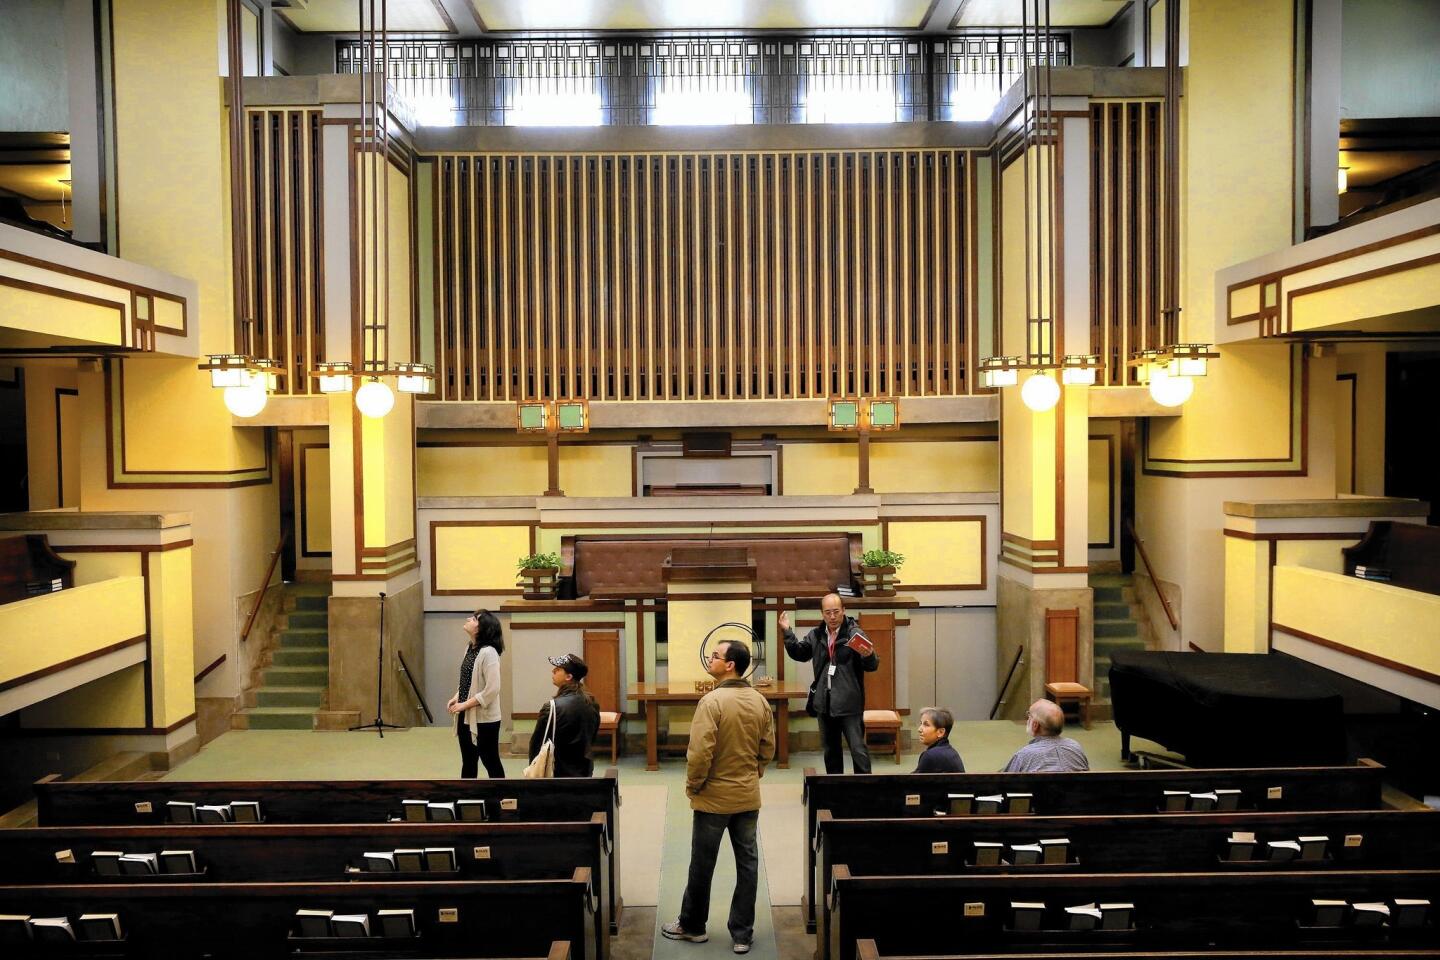 A tour guide explains the architectural wonders inside the sanctuary of Frank Lloyd Wright's Unity Temple before renovations began on the Oak Park building.